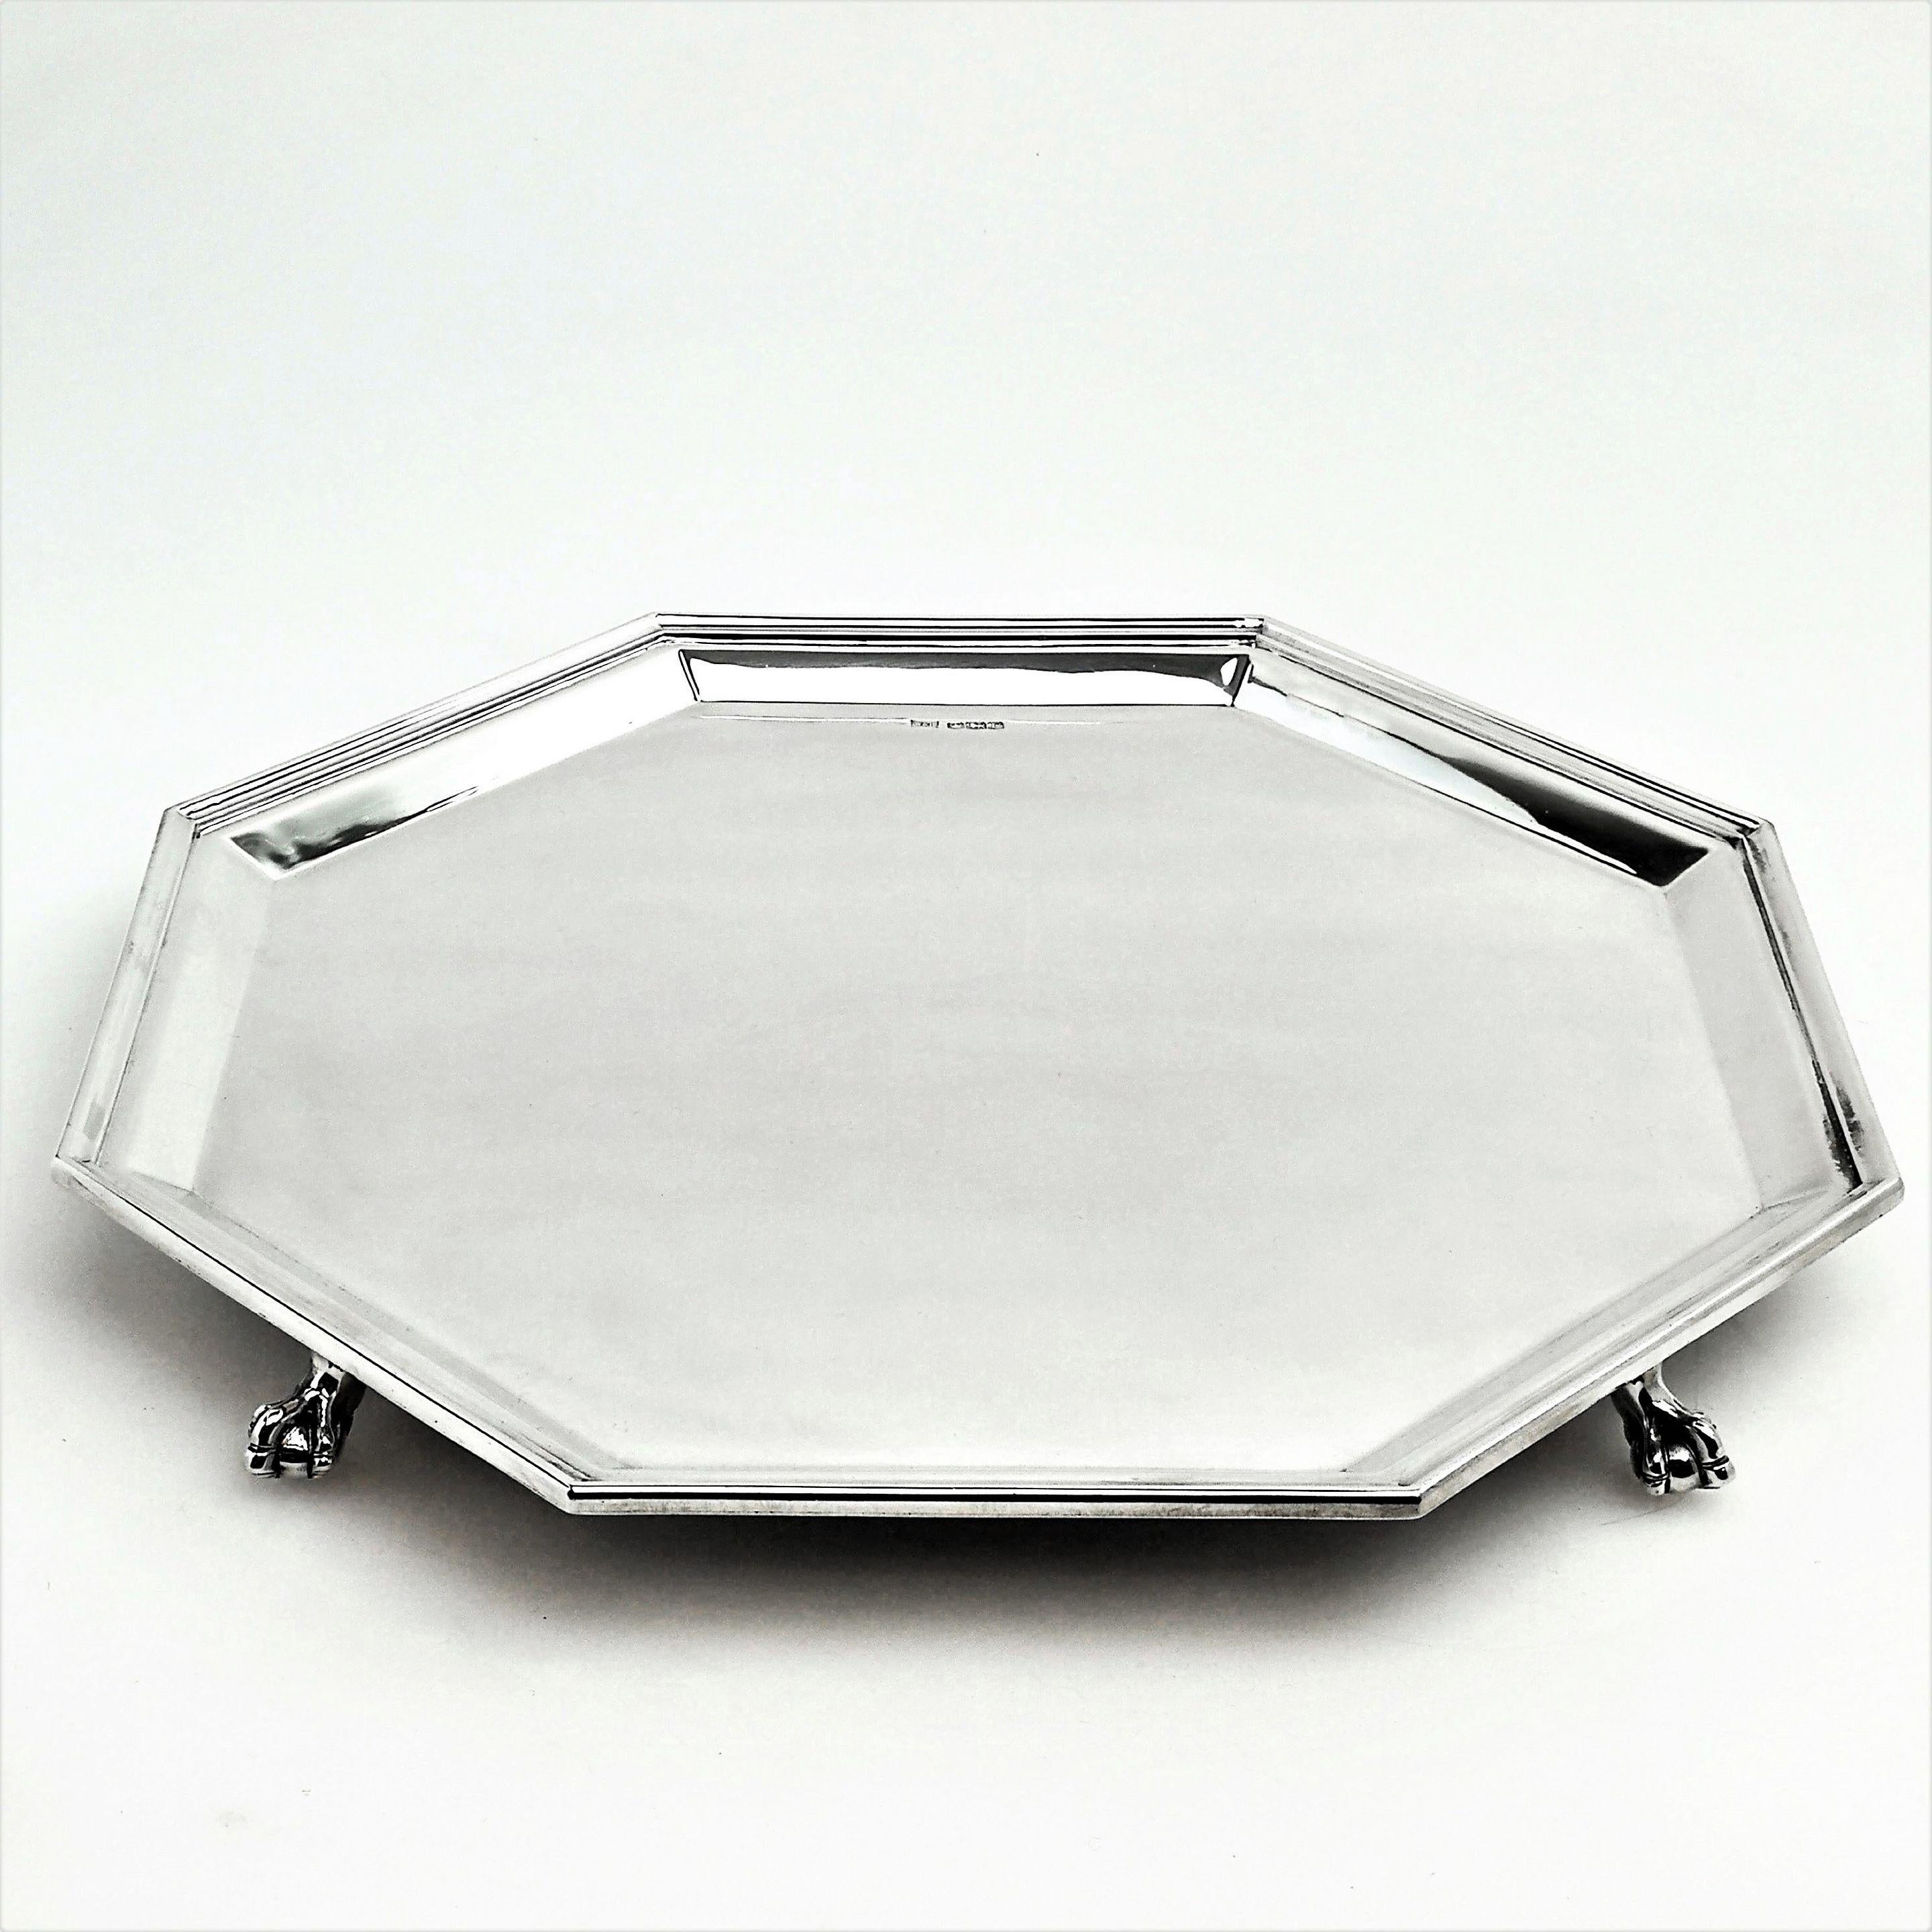 An magnificent solid Silver Salver in a stylish octagonal shape. This Tray has a highly polished finish and stands on ball and claw feet.
 
 Made in 1948 in Sheffield by Walker & Hall.
 
Approx. Weight - 51.5oz / 6104g
Approx. Width - 14.5 inches
 
